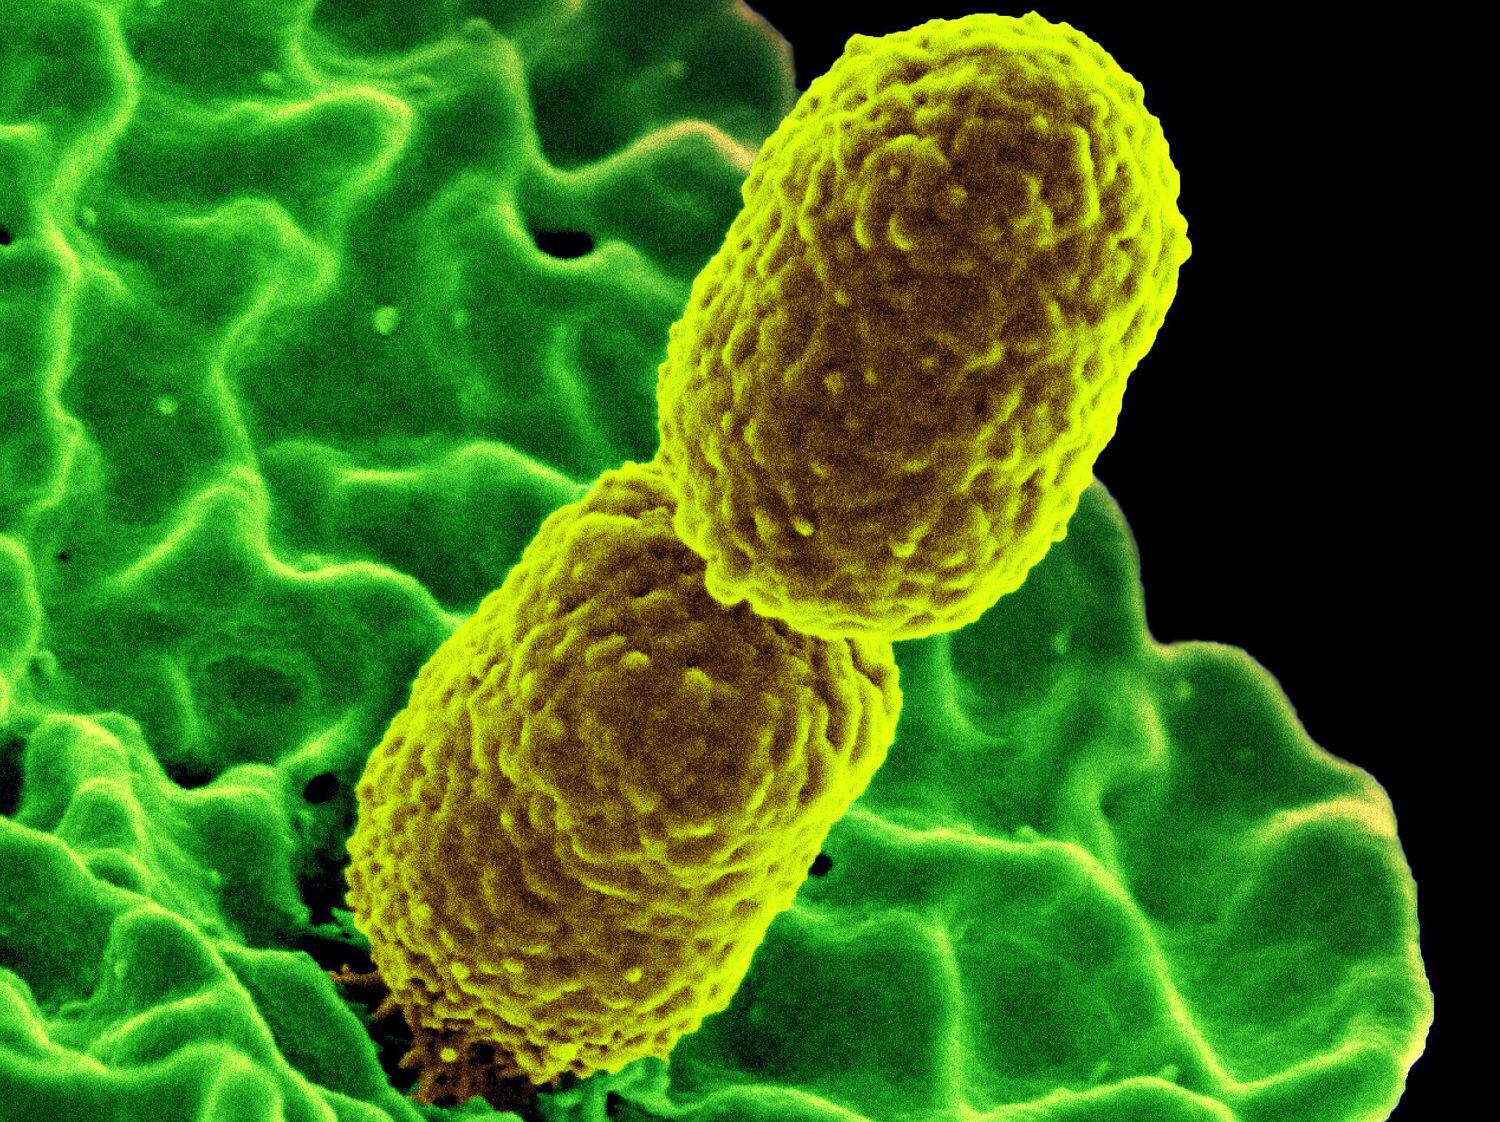 The intestinal inhabitant Klebsiella pneumoniae is one of the most dreaded hospital germs. © NIAID  CREDIT National Institute of Allergy and Infectious Diseases (NIAID)